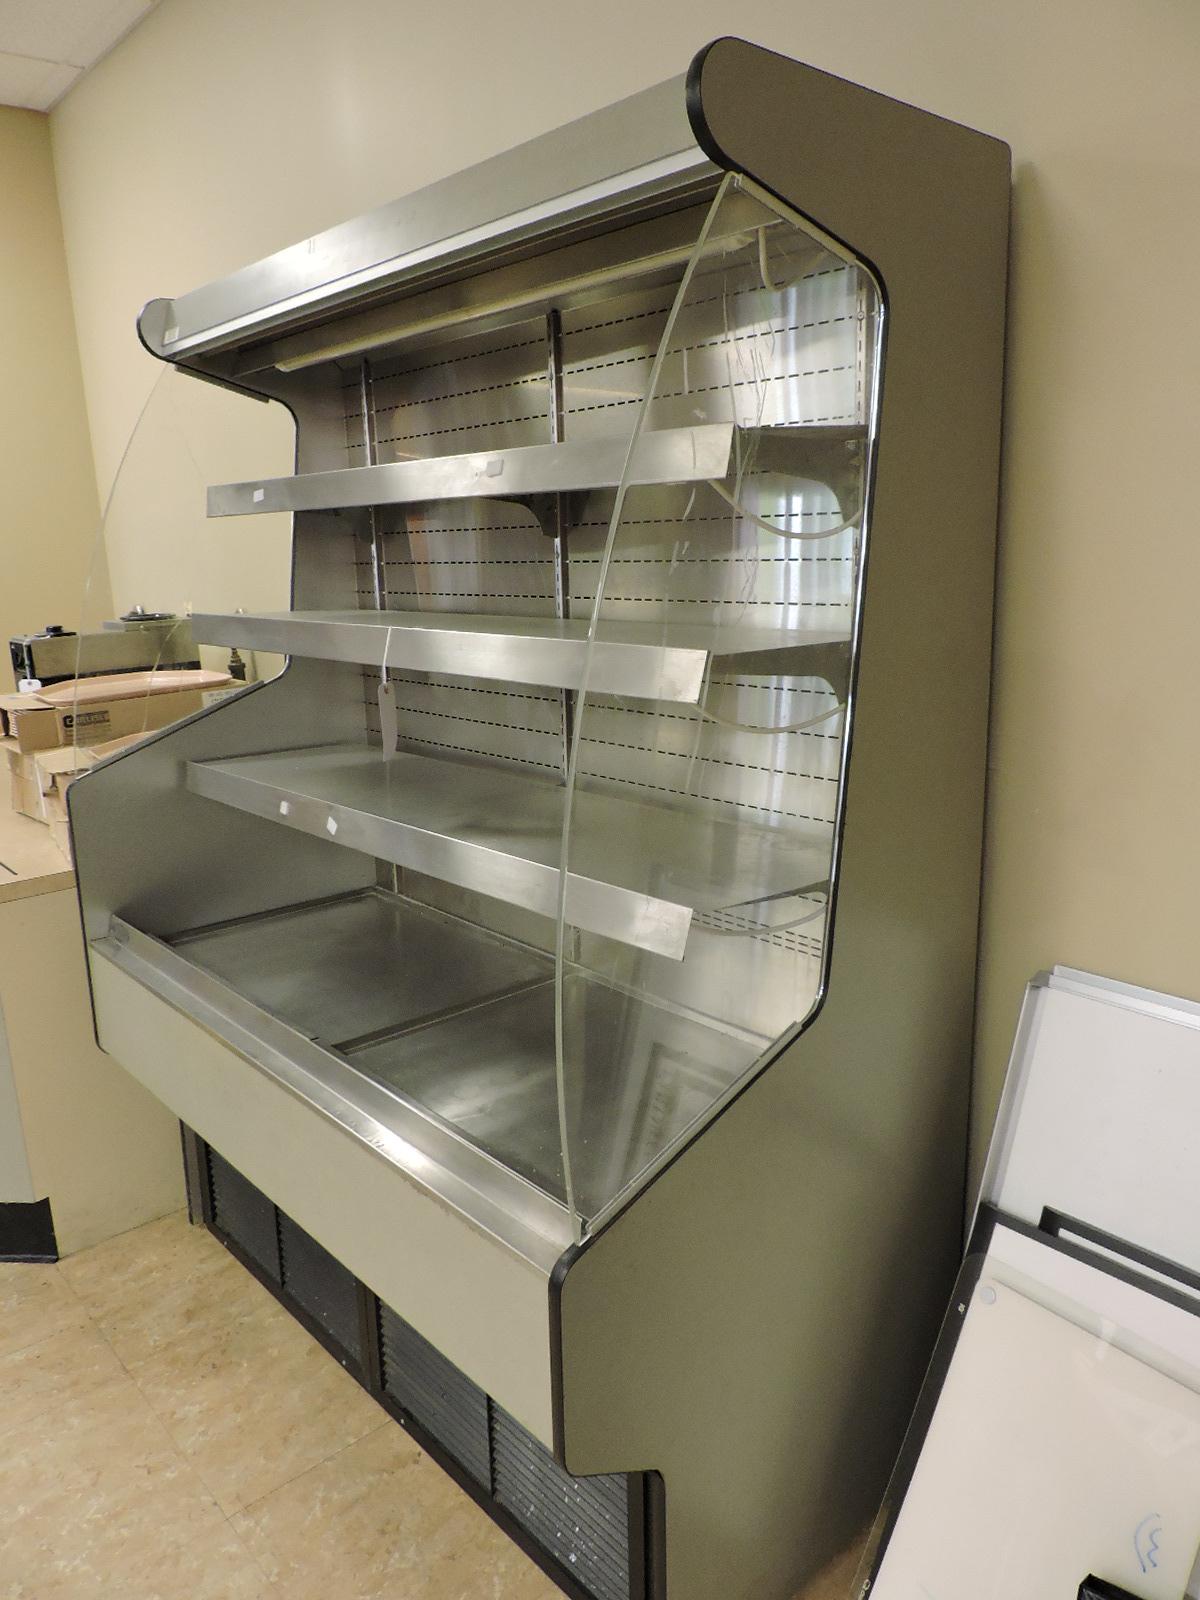 4-Level Refrigerated Retail Display Case - Stainless Steel Shelves